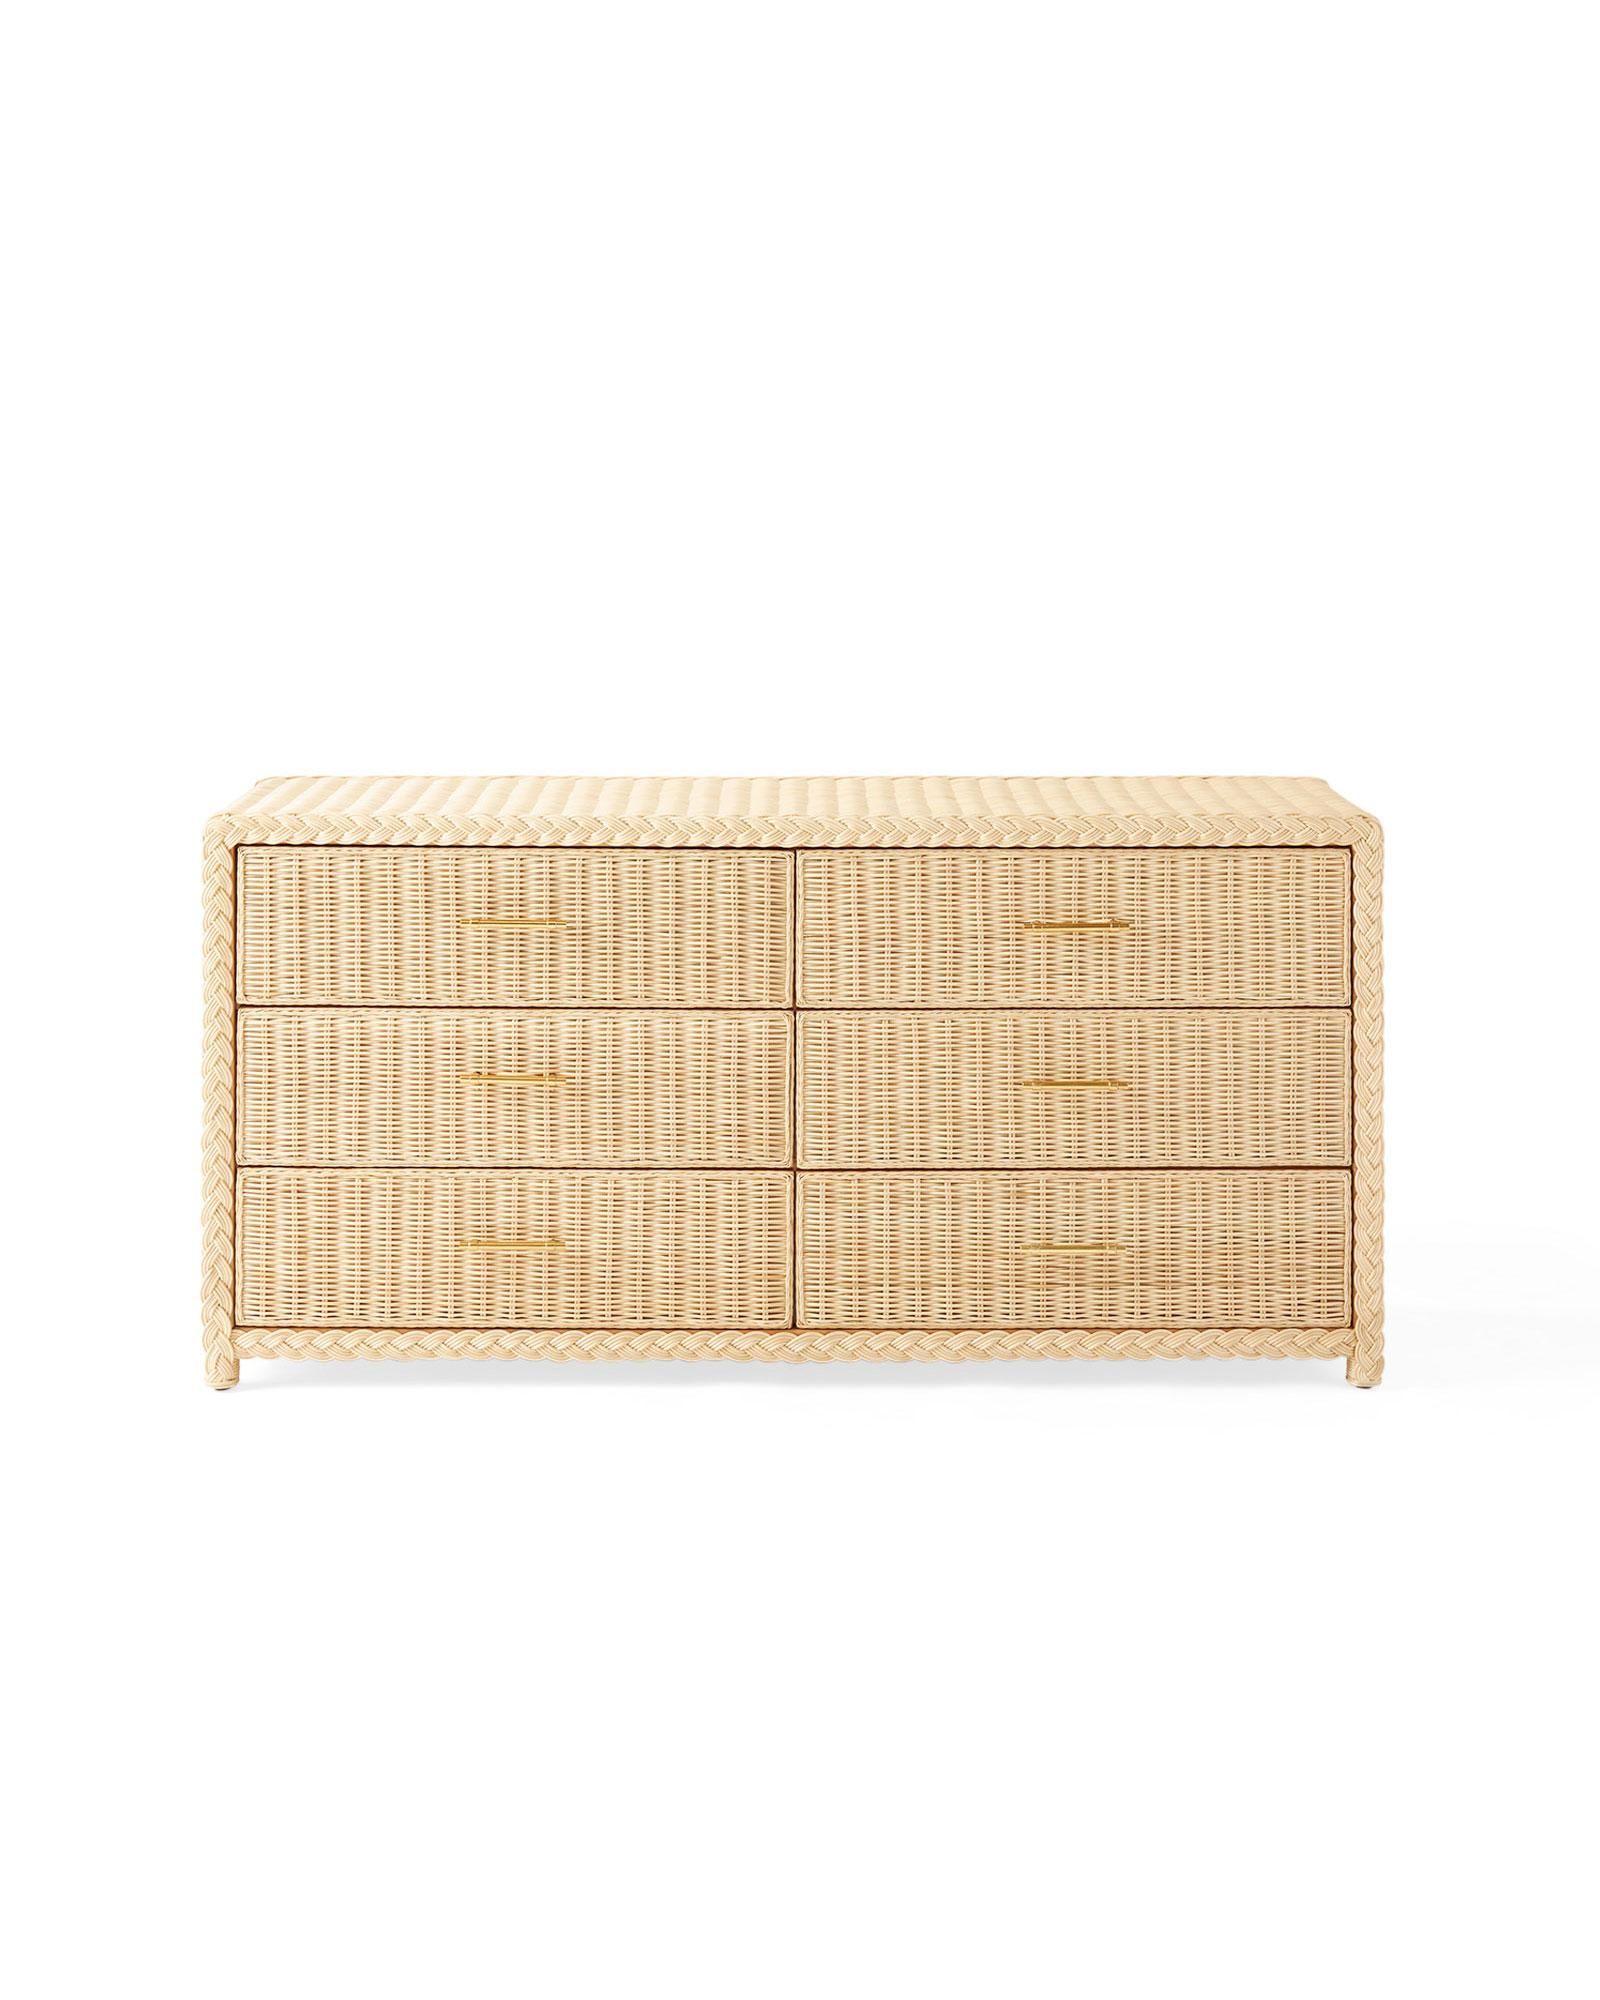 Bungalow Wide Dresser | Serena and Lily